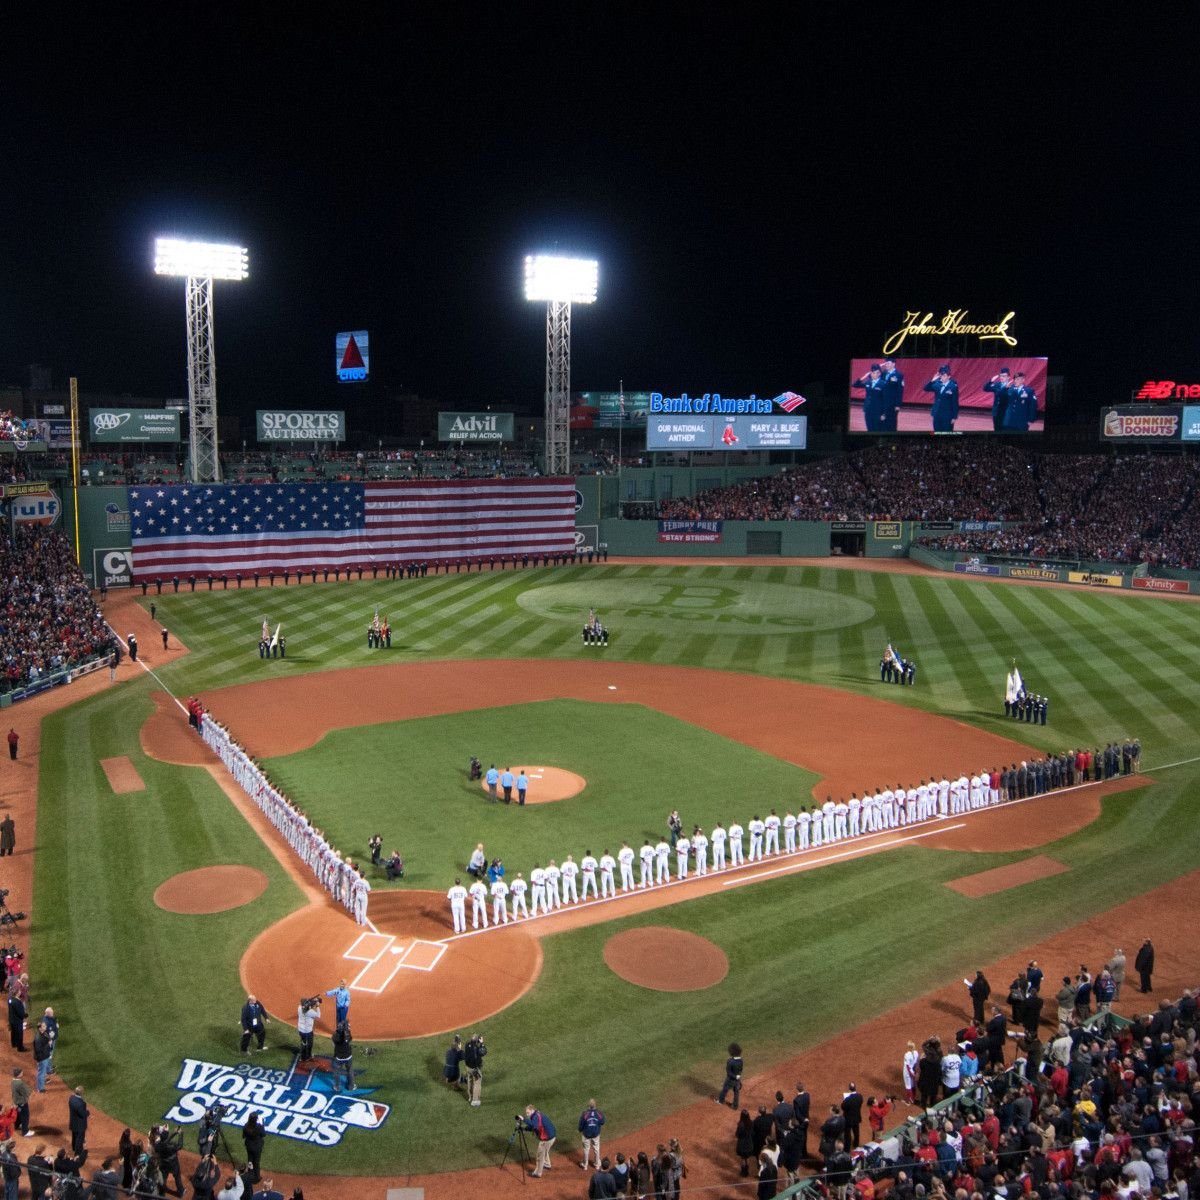 Boston: Witness an Boston Red Sox Major League Baseball Game at Fenway Park